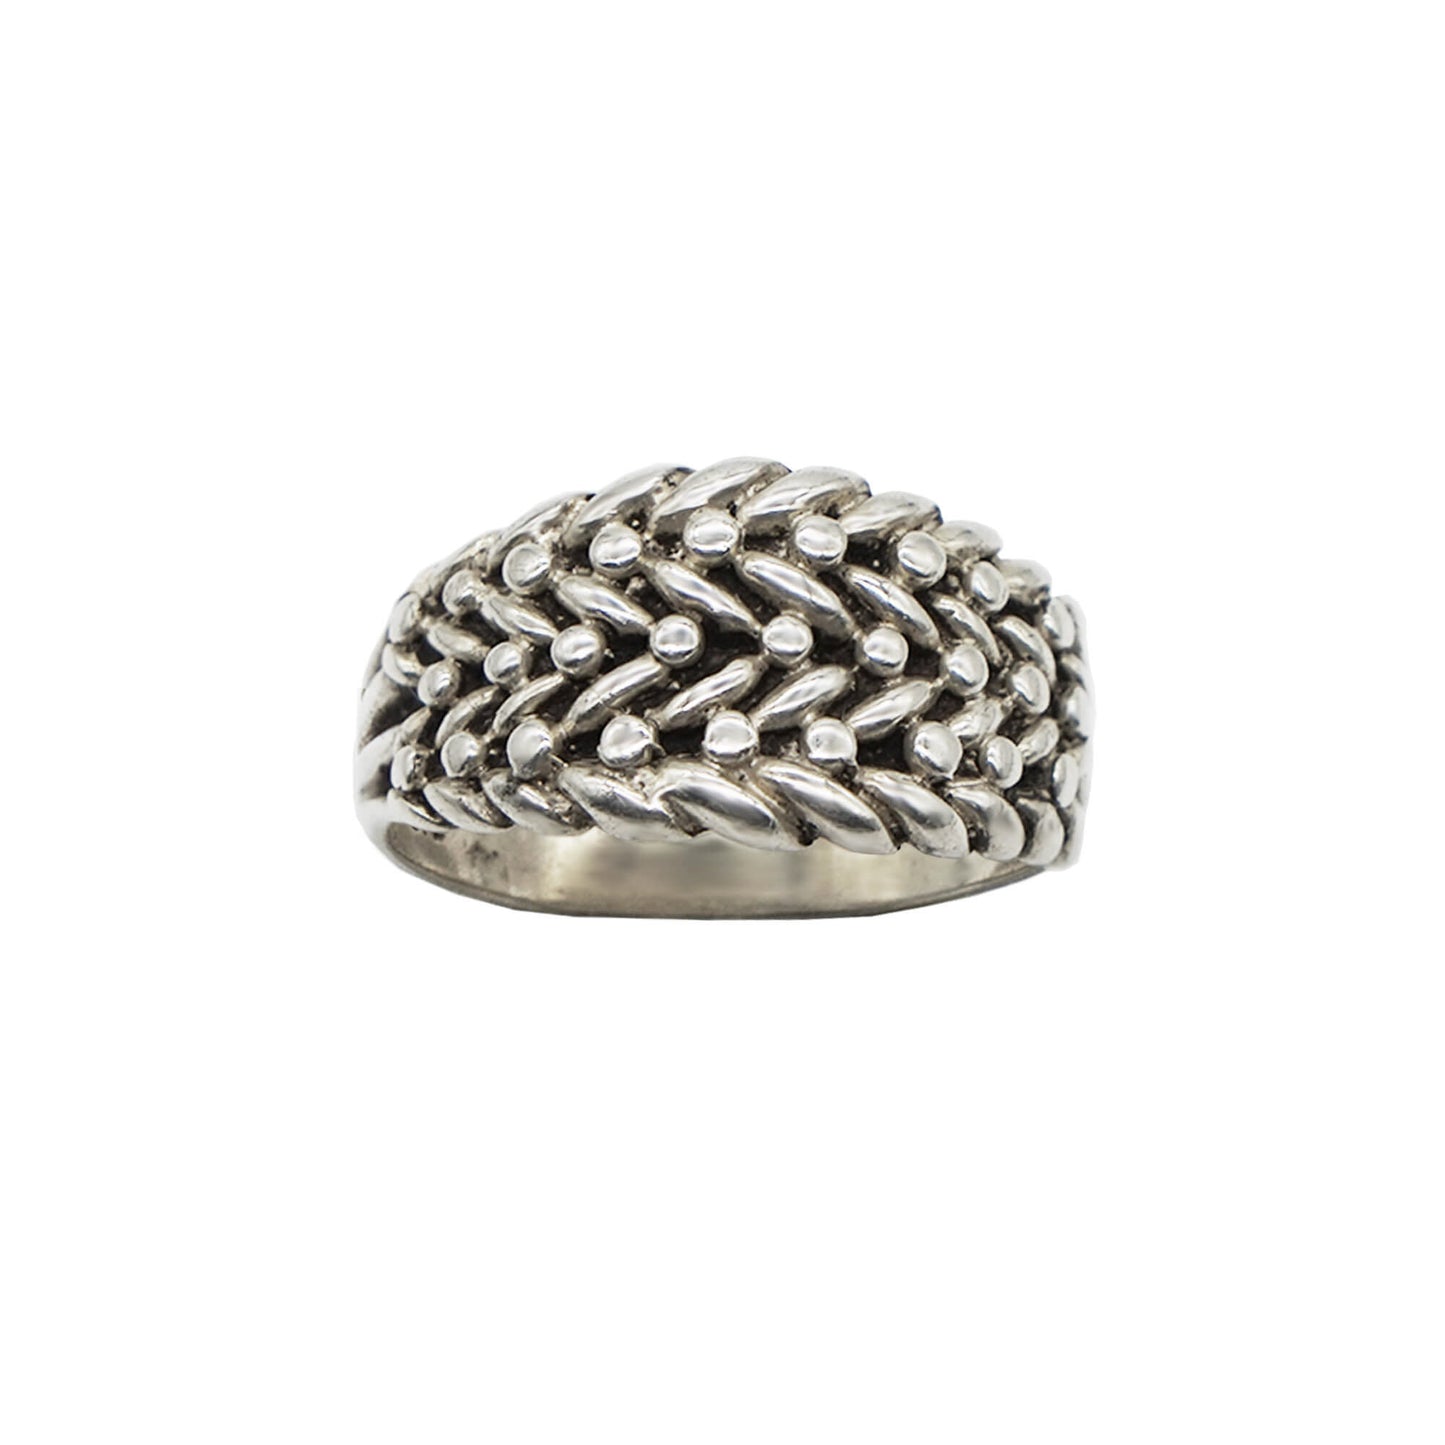 Vintage sterling silver wide band ring with double row keeper weave pattern.